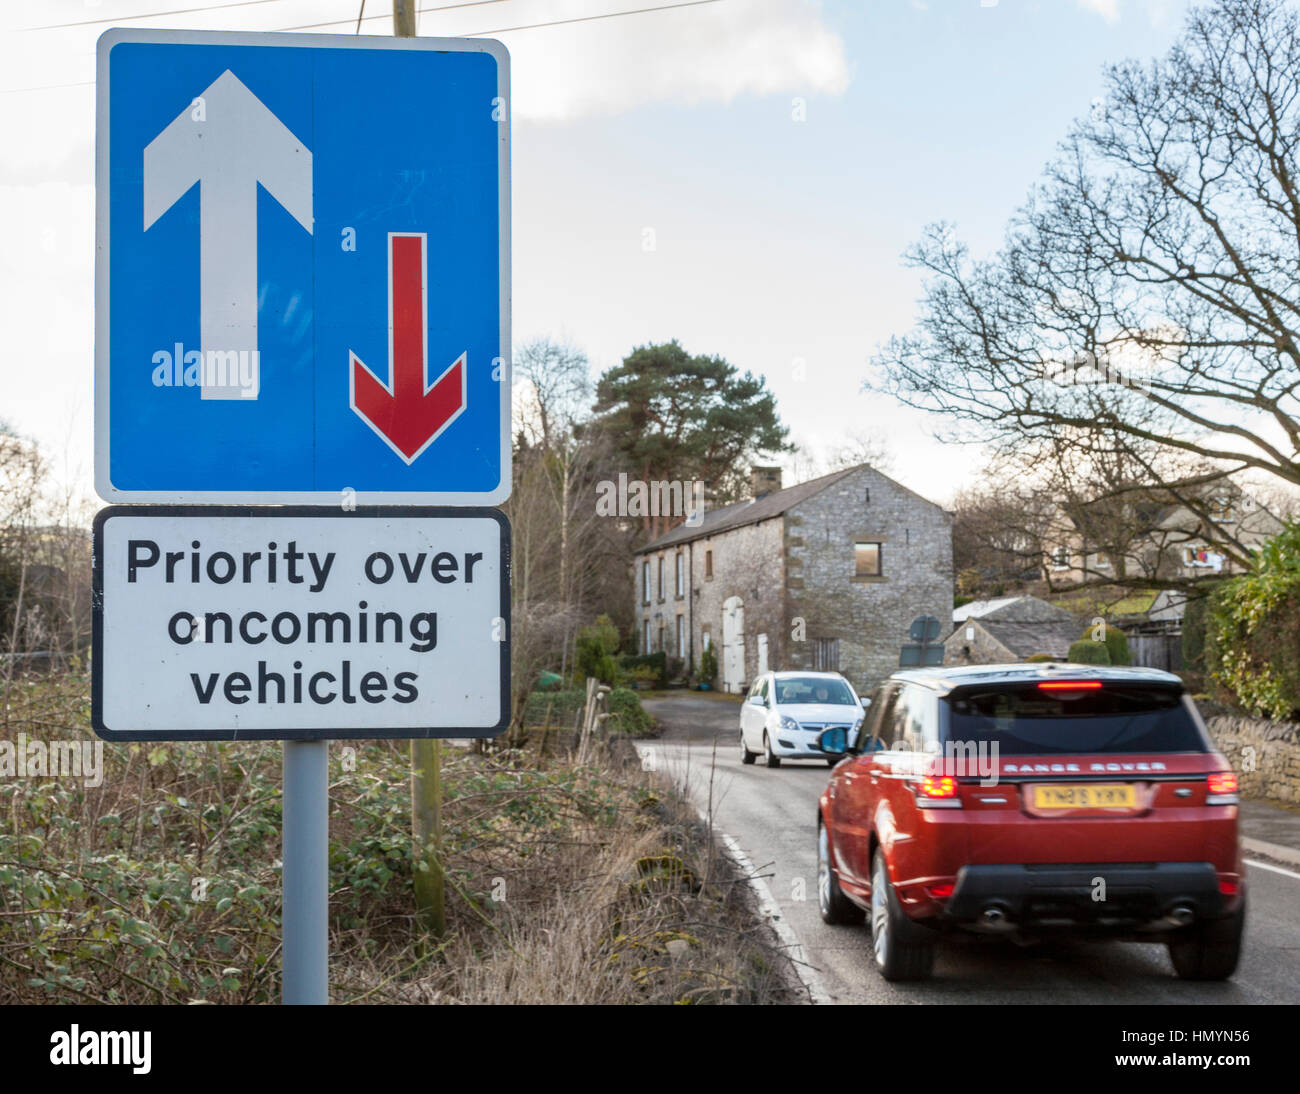 Priority over oncoming vehicles road sign, Brough, Derbyshire. England, UK Stock Photo